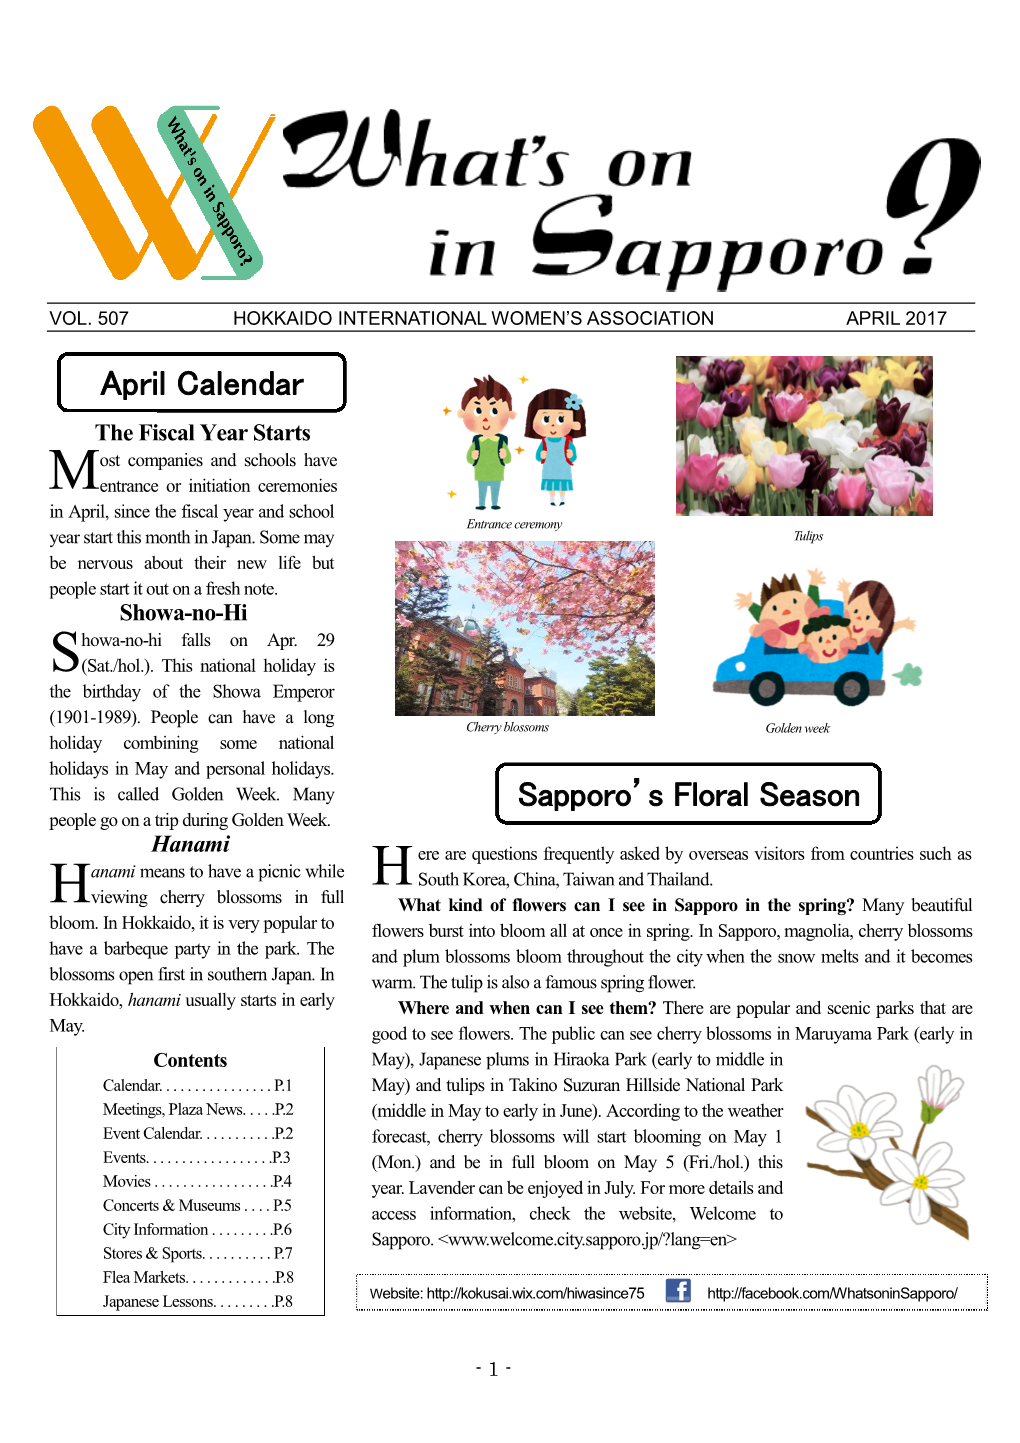 April Issue of What's on in Sapporo?